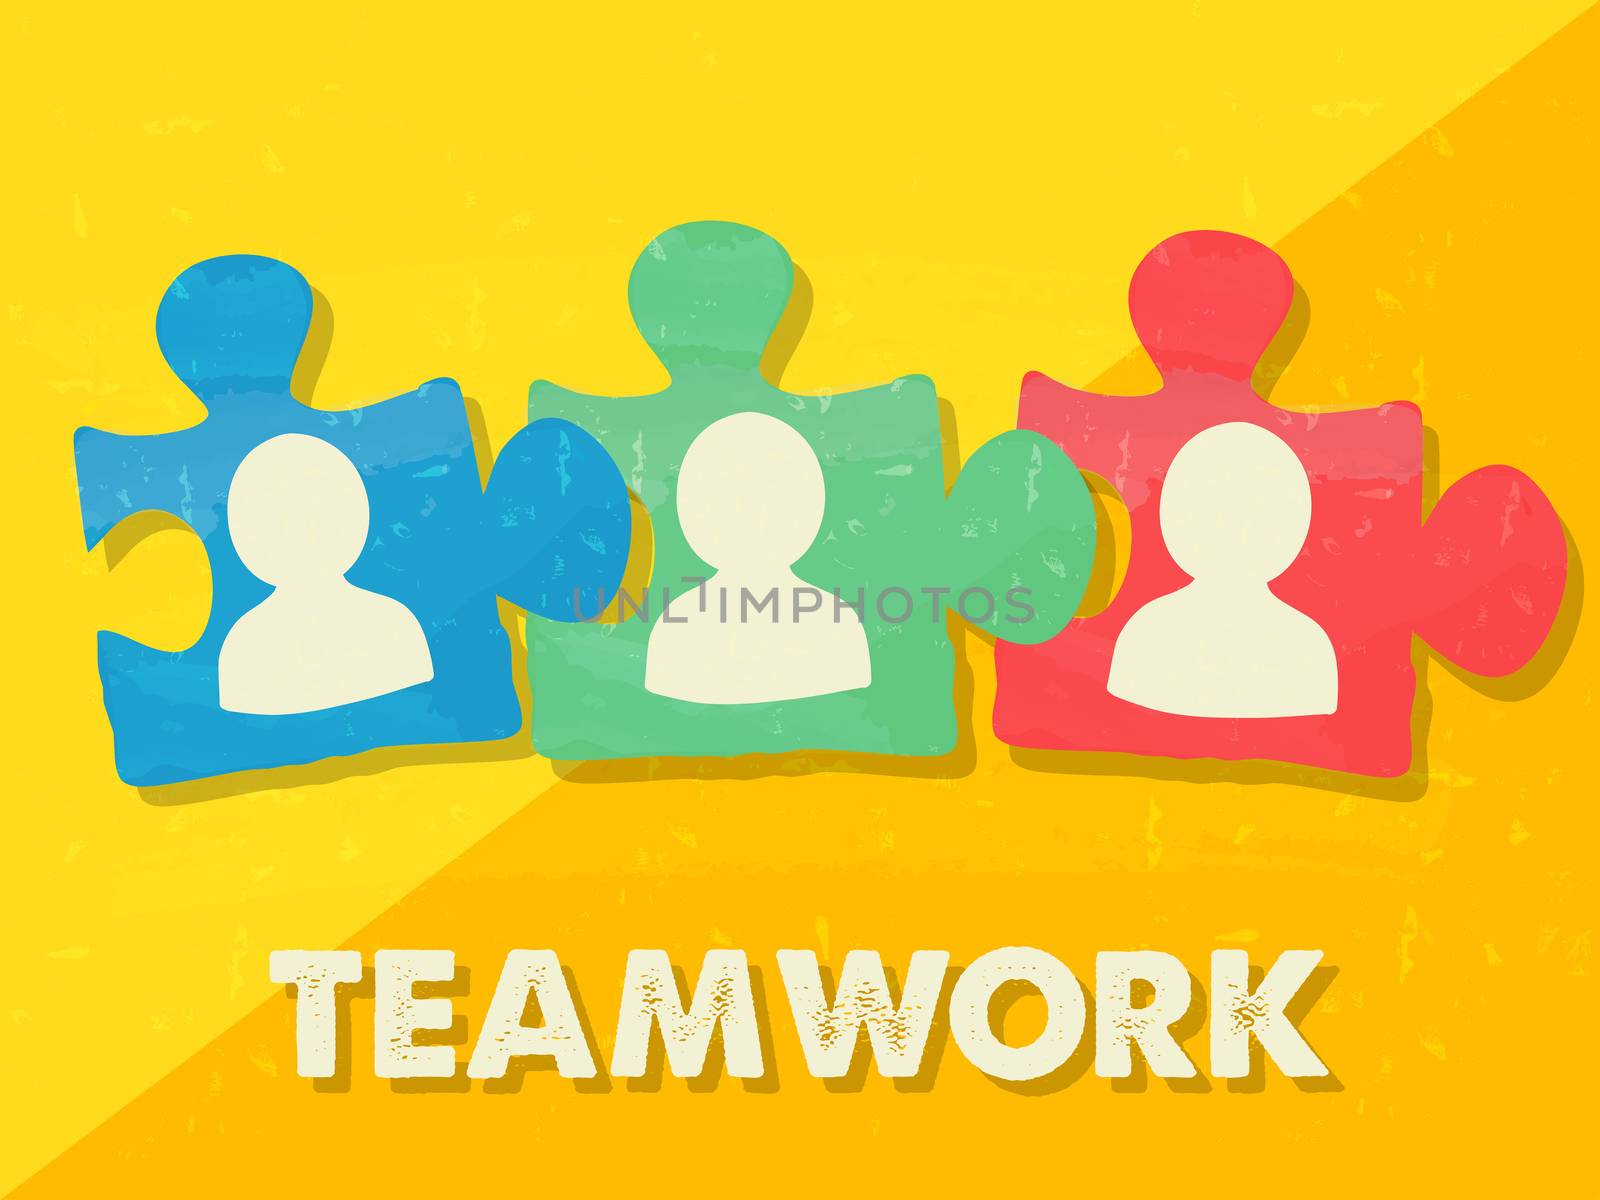 teamwork and puzzle pieces with person signs over yellow background, grunge flat design, business team building concept